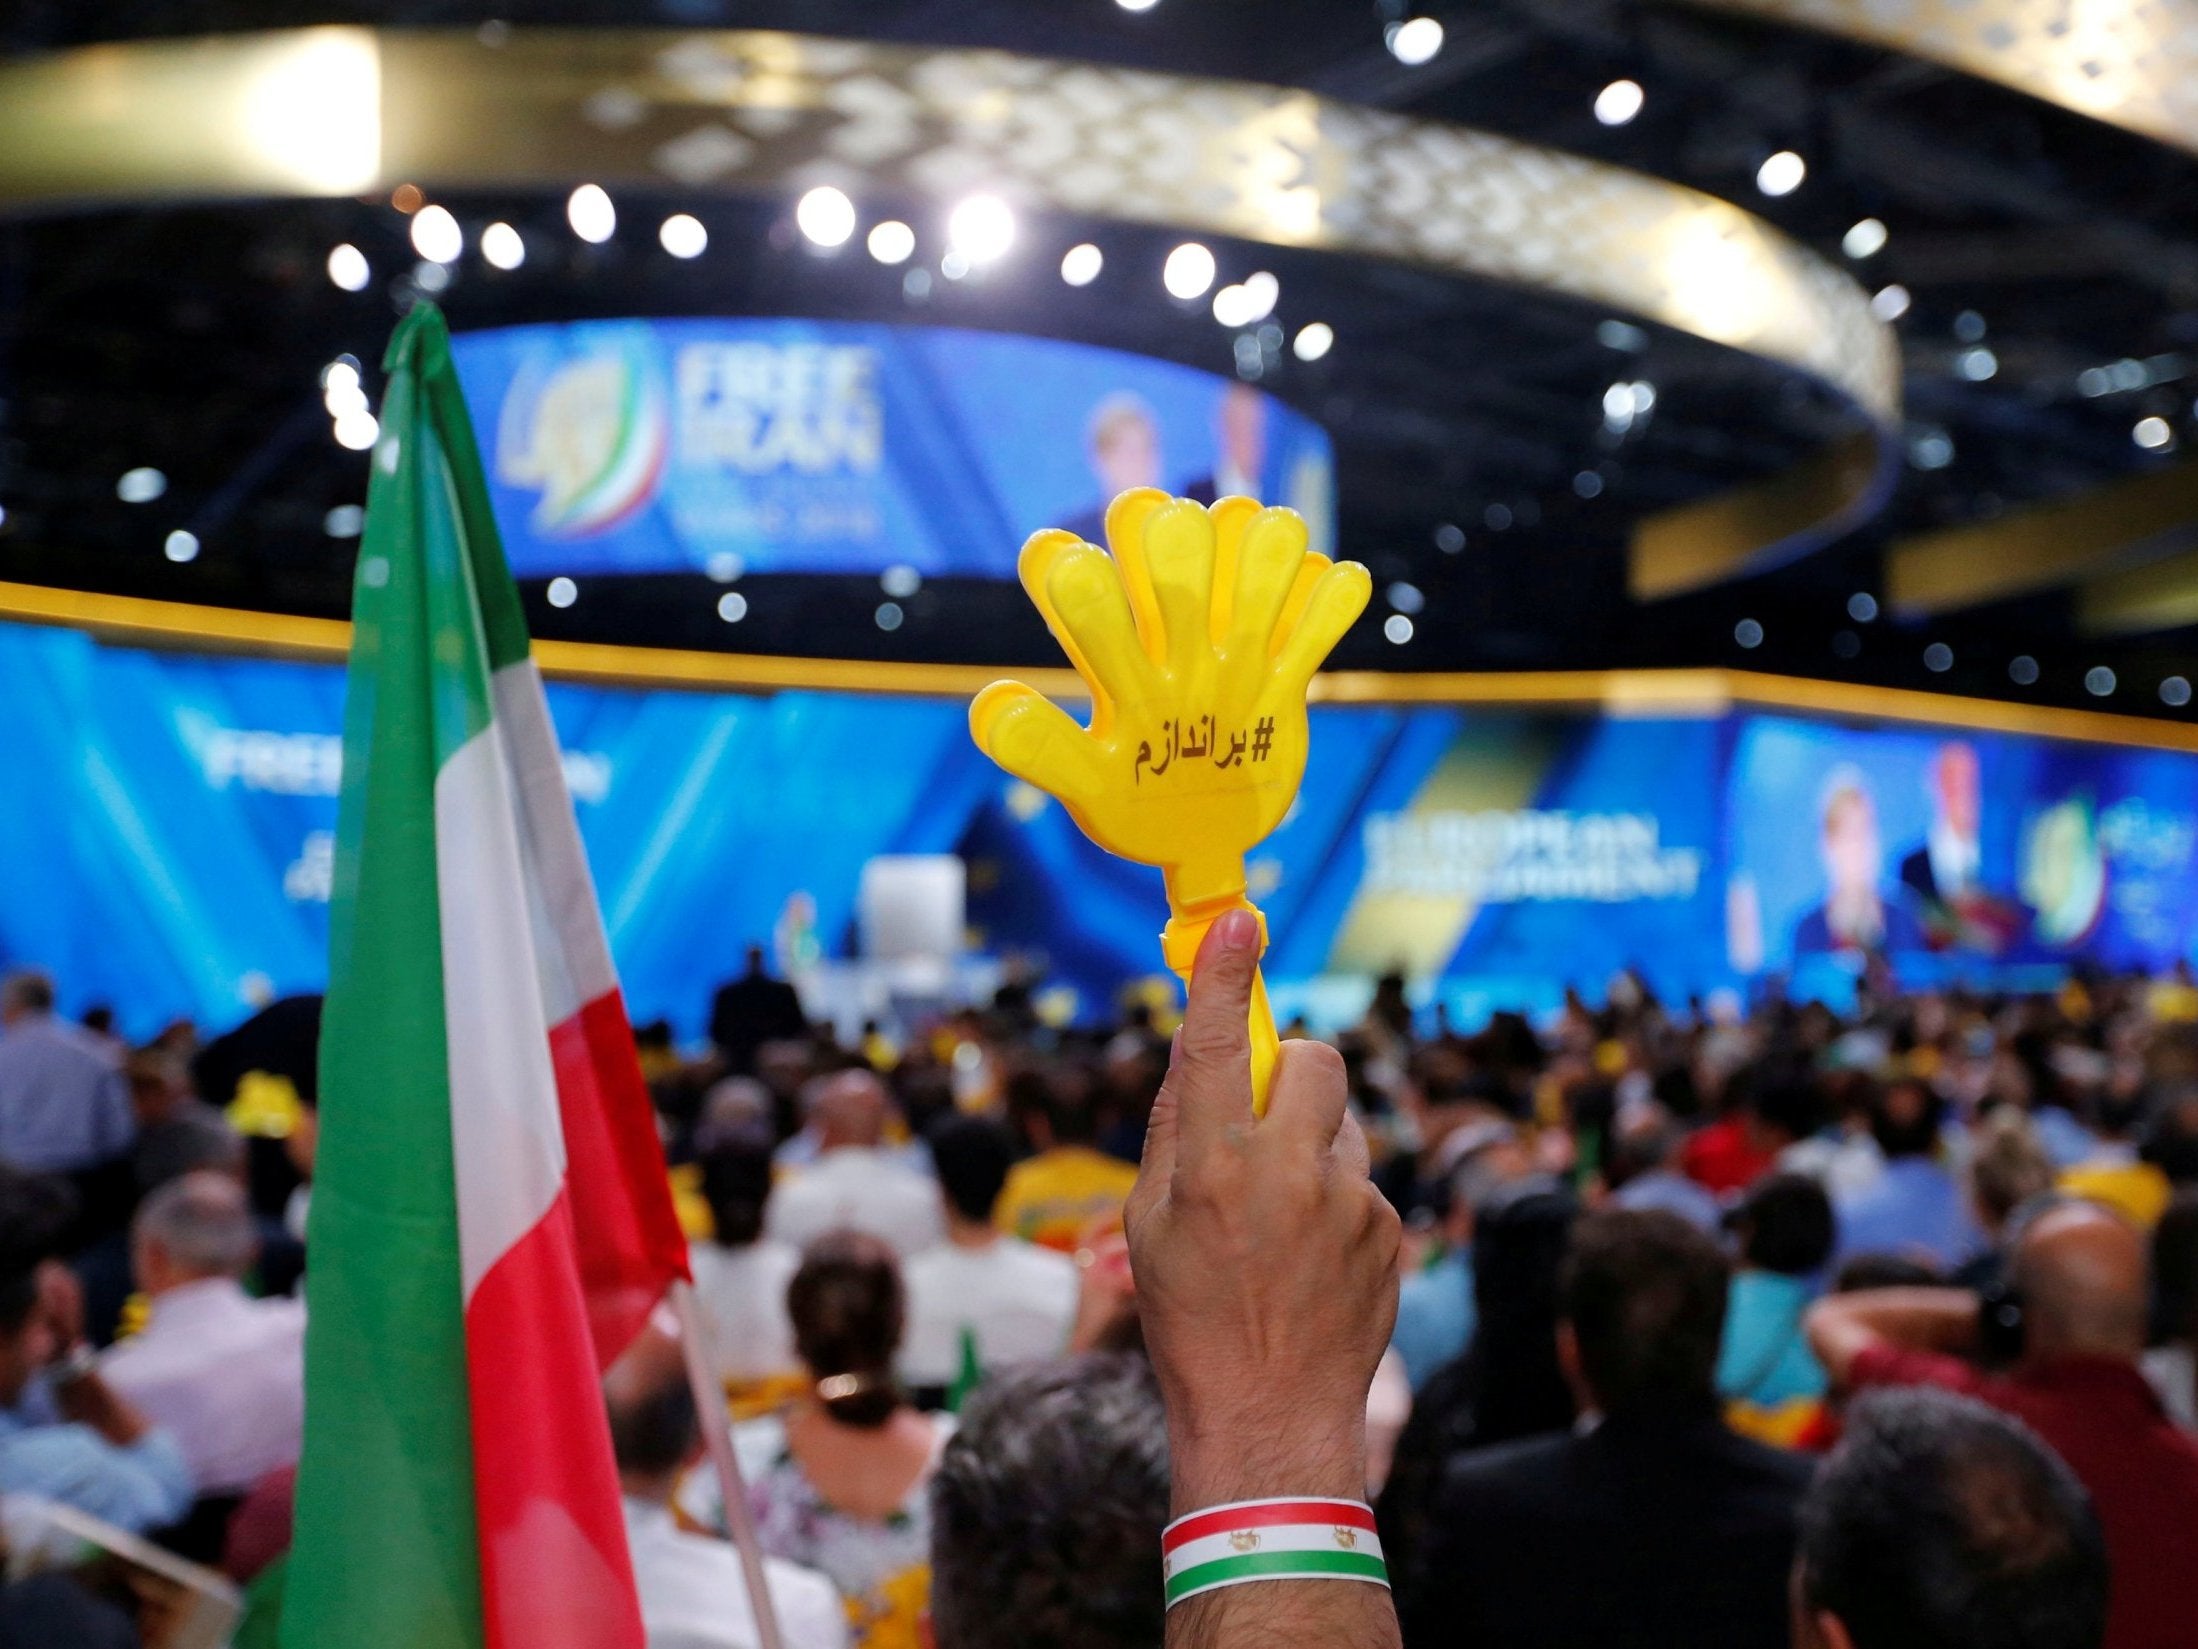 Supporters of Maryam Rajavi, president-elect of the National Council of Resistance of Iran (NCRI), attend a rally in Villepinte, near Paris, France, 30 June 2018